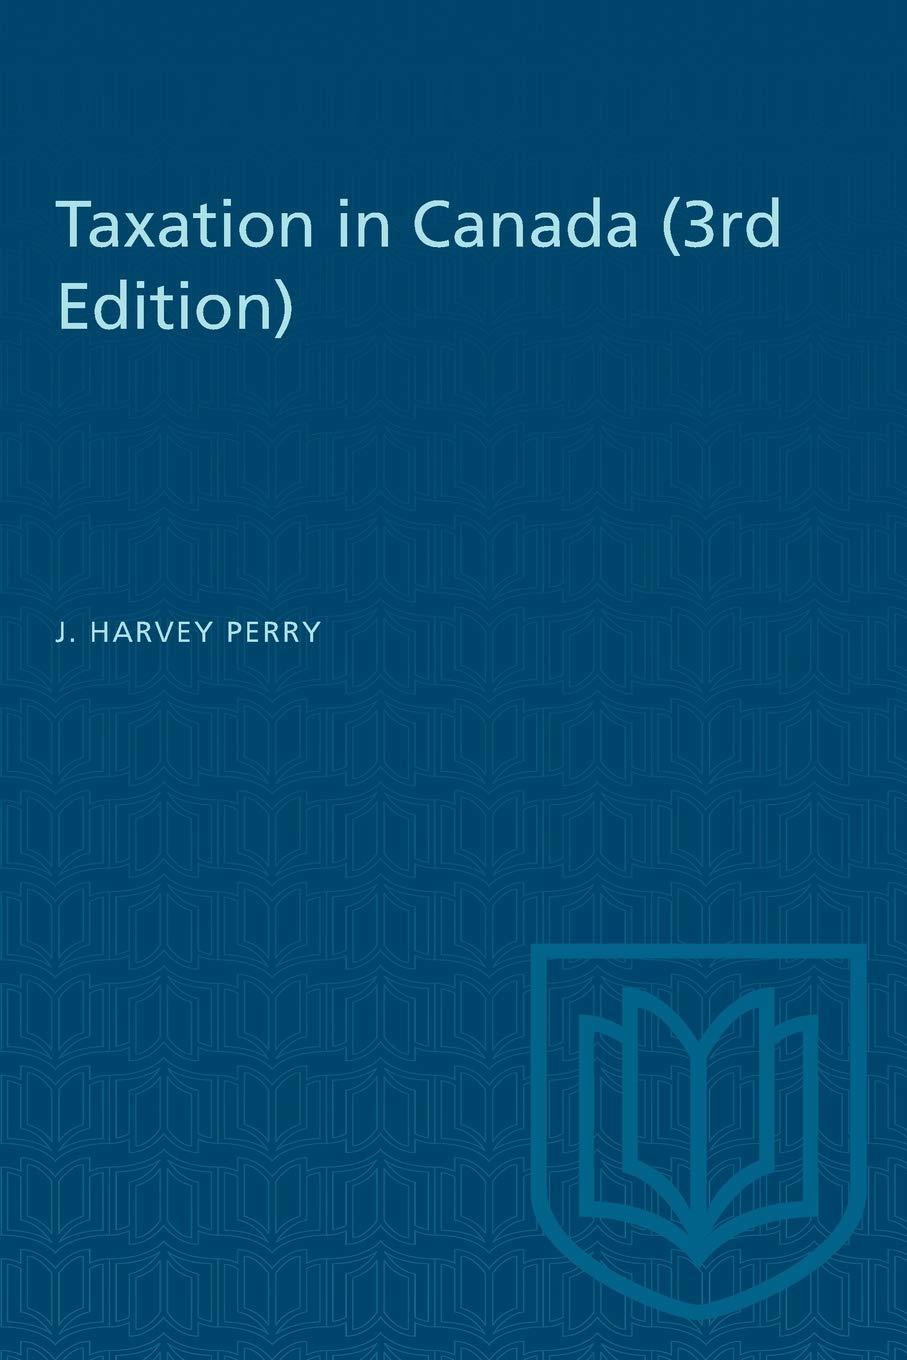 taxation in canada 3rd edition j. harvey perry 1487581521, 9781487581527